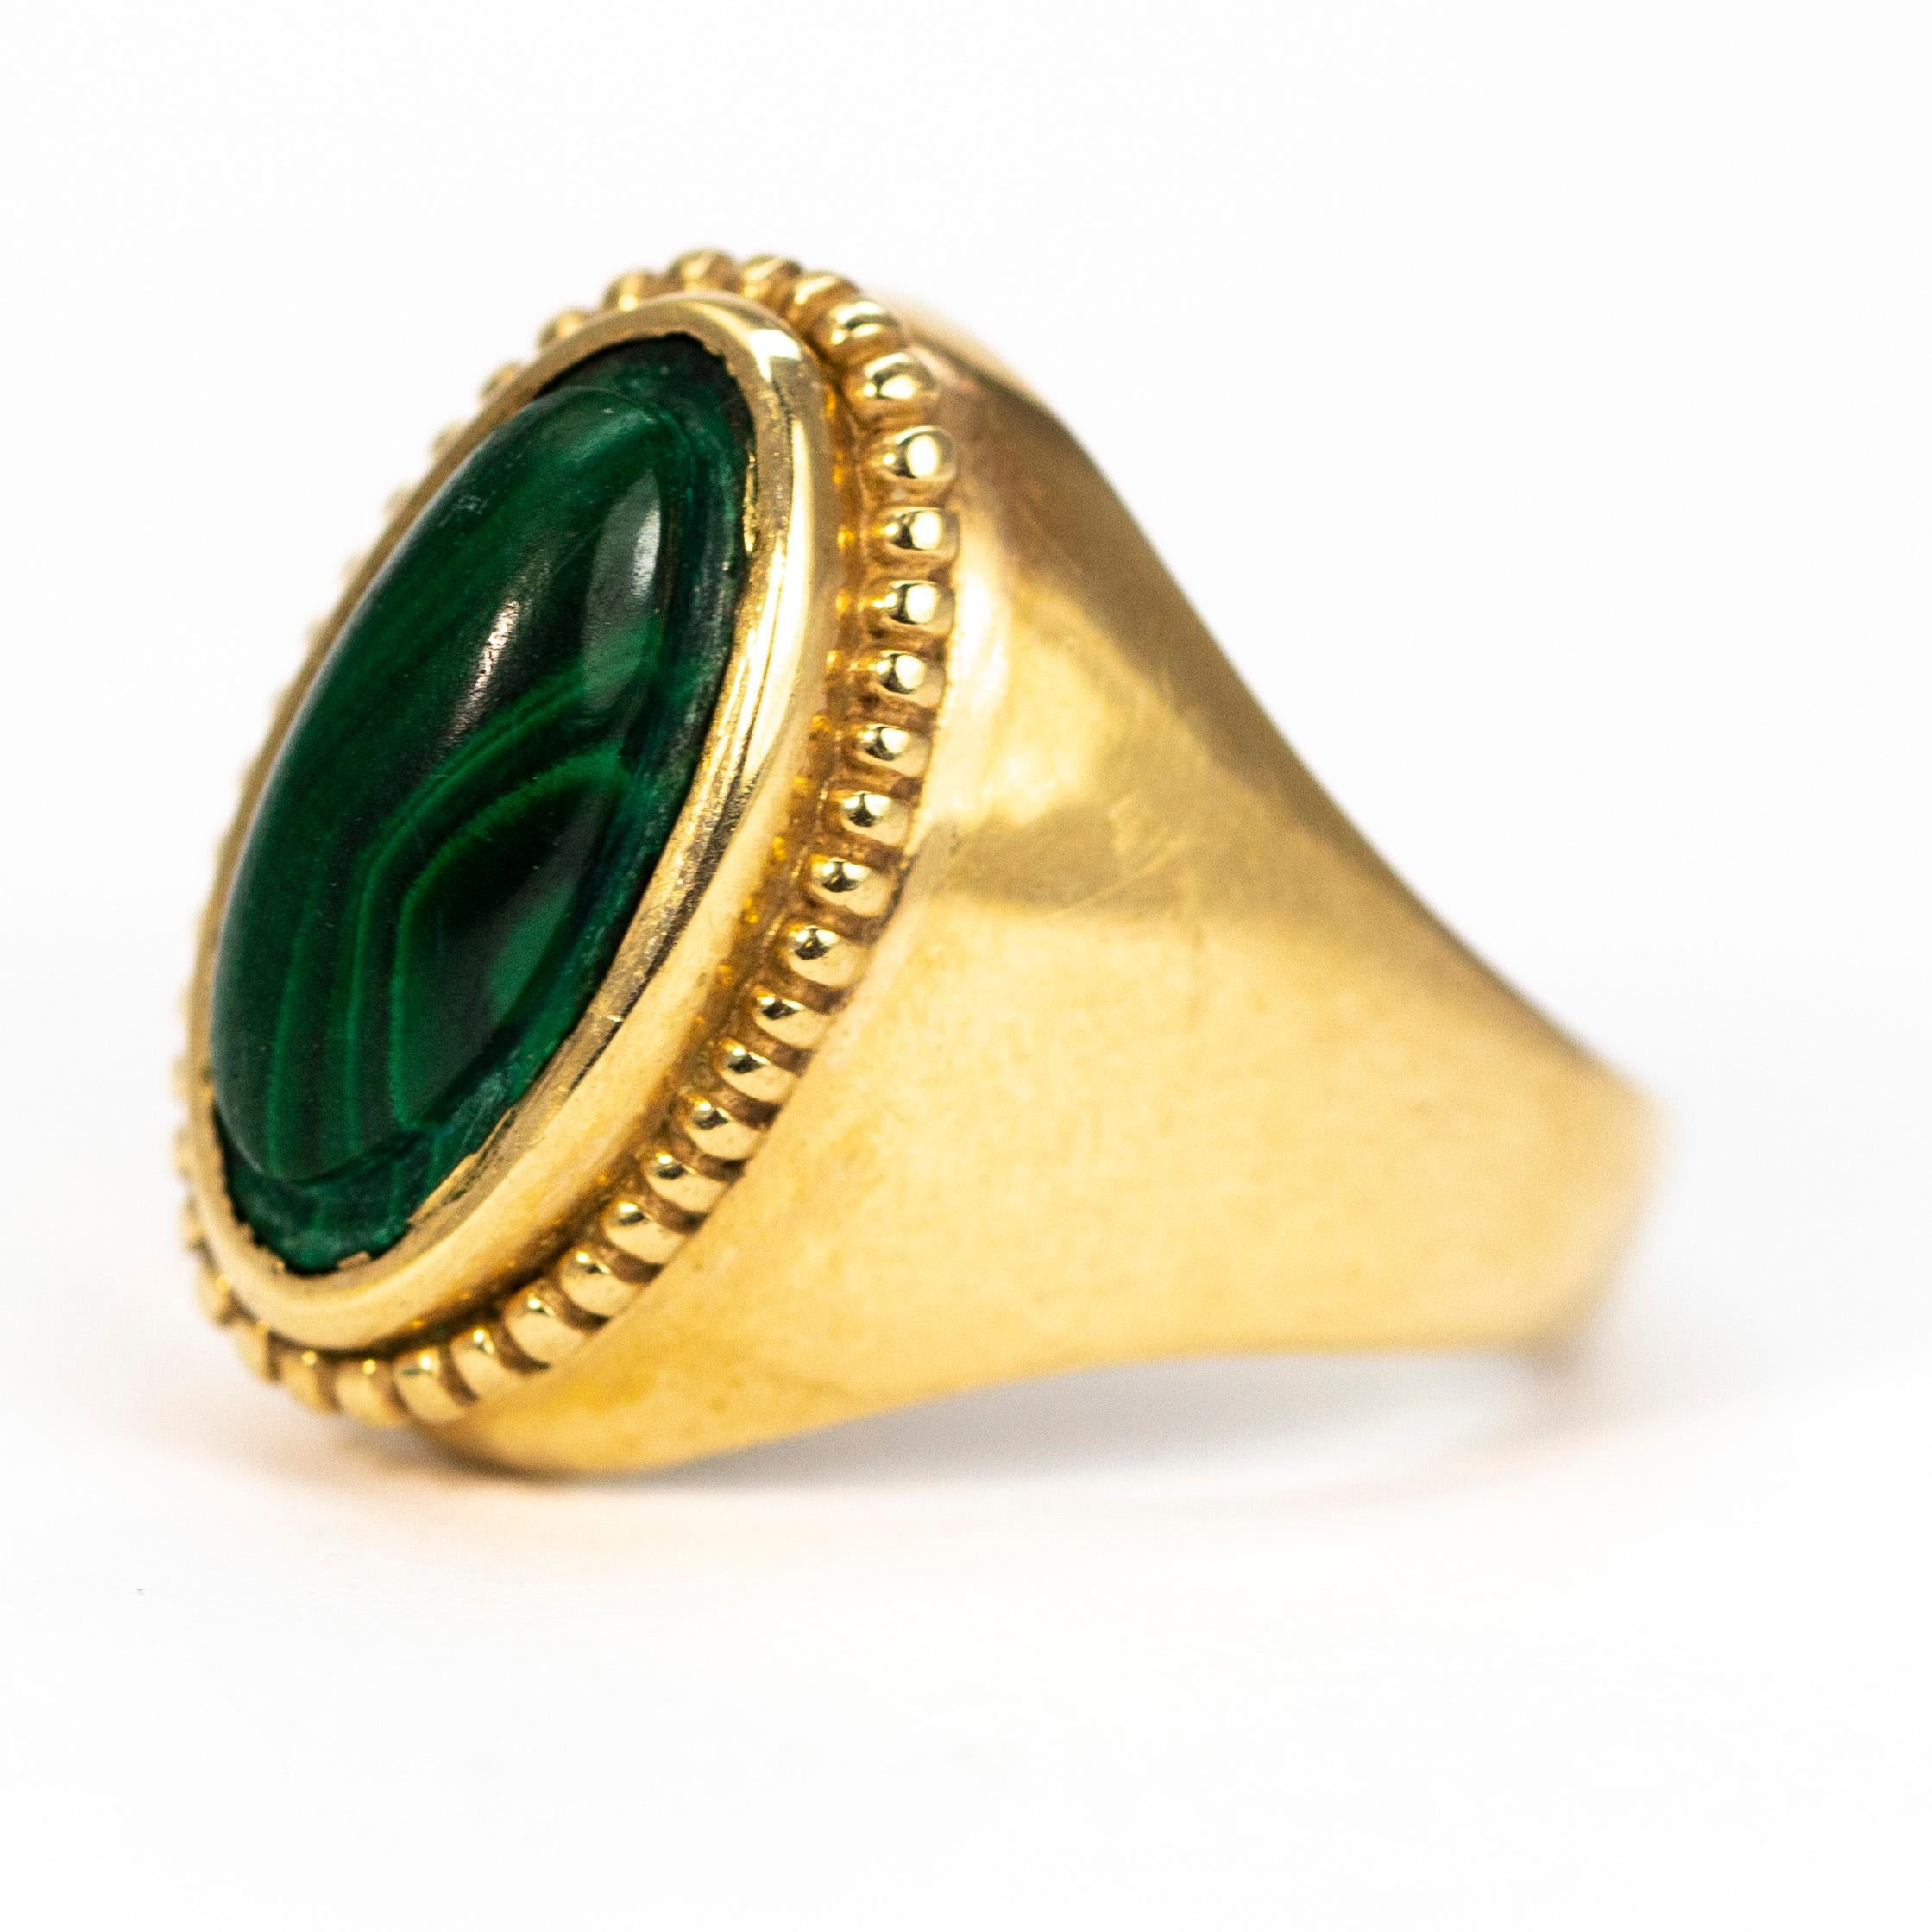 This chunky stylish ring holds a glossy cabochon malachite stone which is set within a beaded setting modelled in 9ct gold. The stone is marbled with all different shades of green and is so pretty.

Ring Size: N 1/2 or 6 3/4
Stone Dimensions: